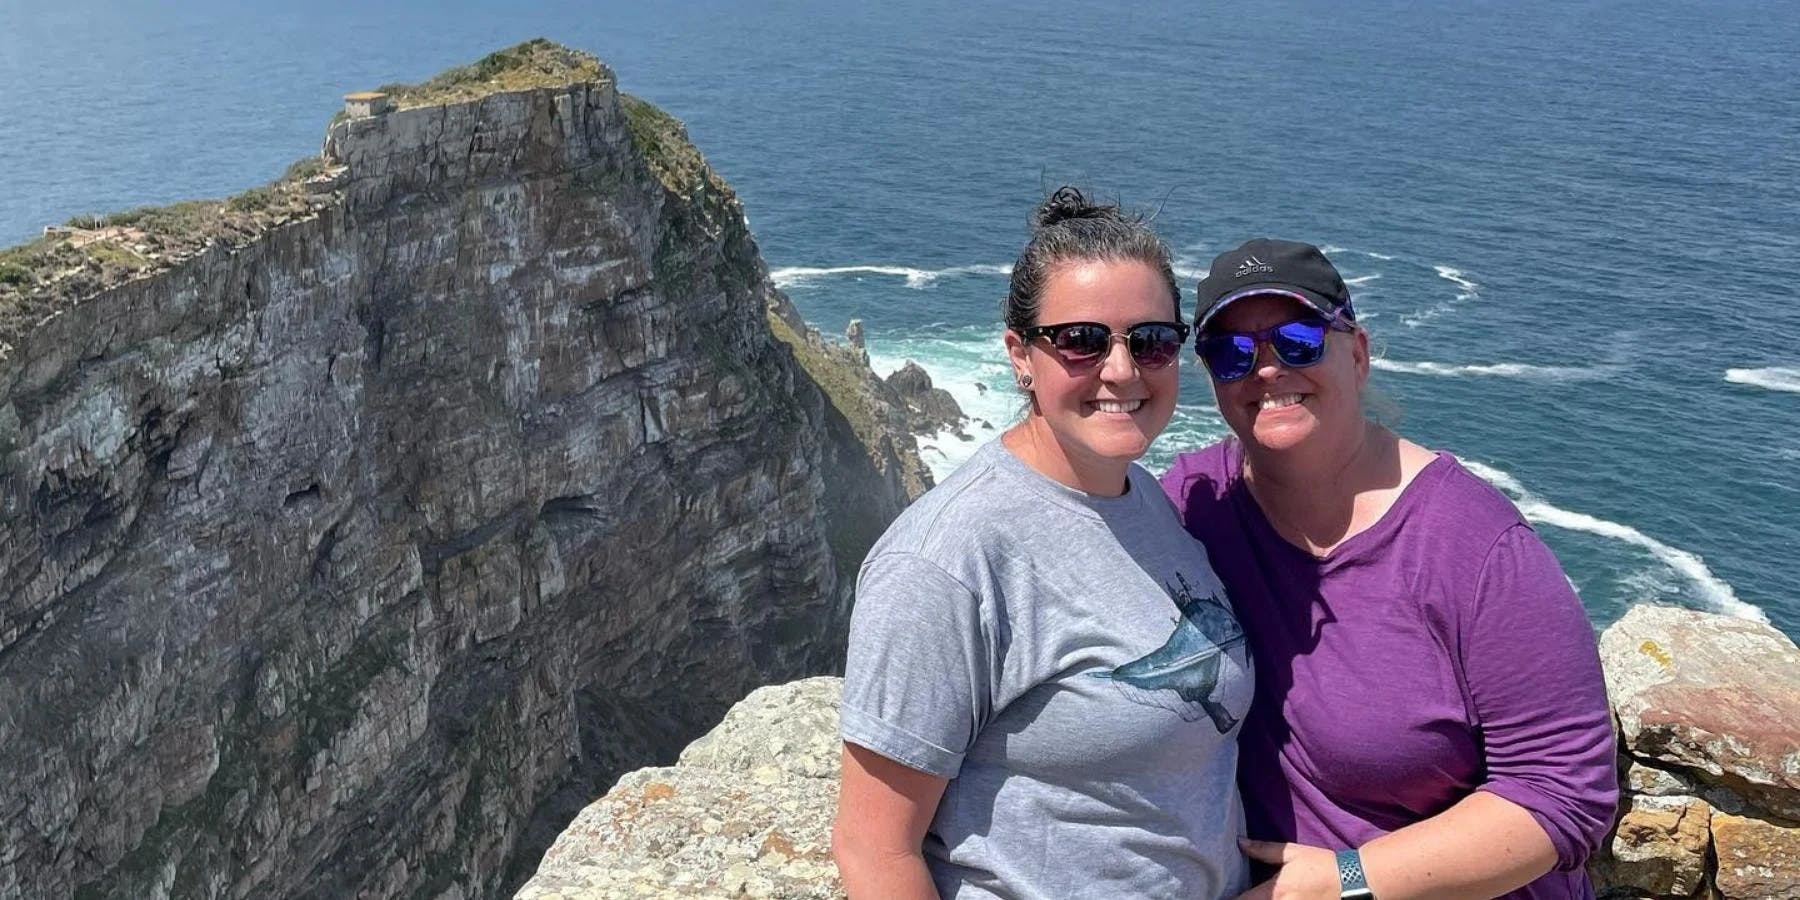 Meredith and Janae: Queer Business Owners Traveling the World as a Couple
